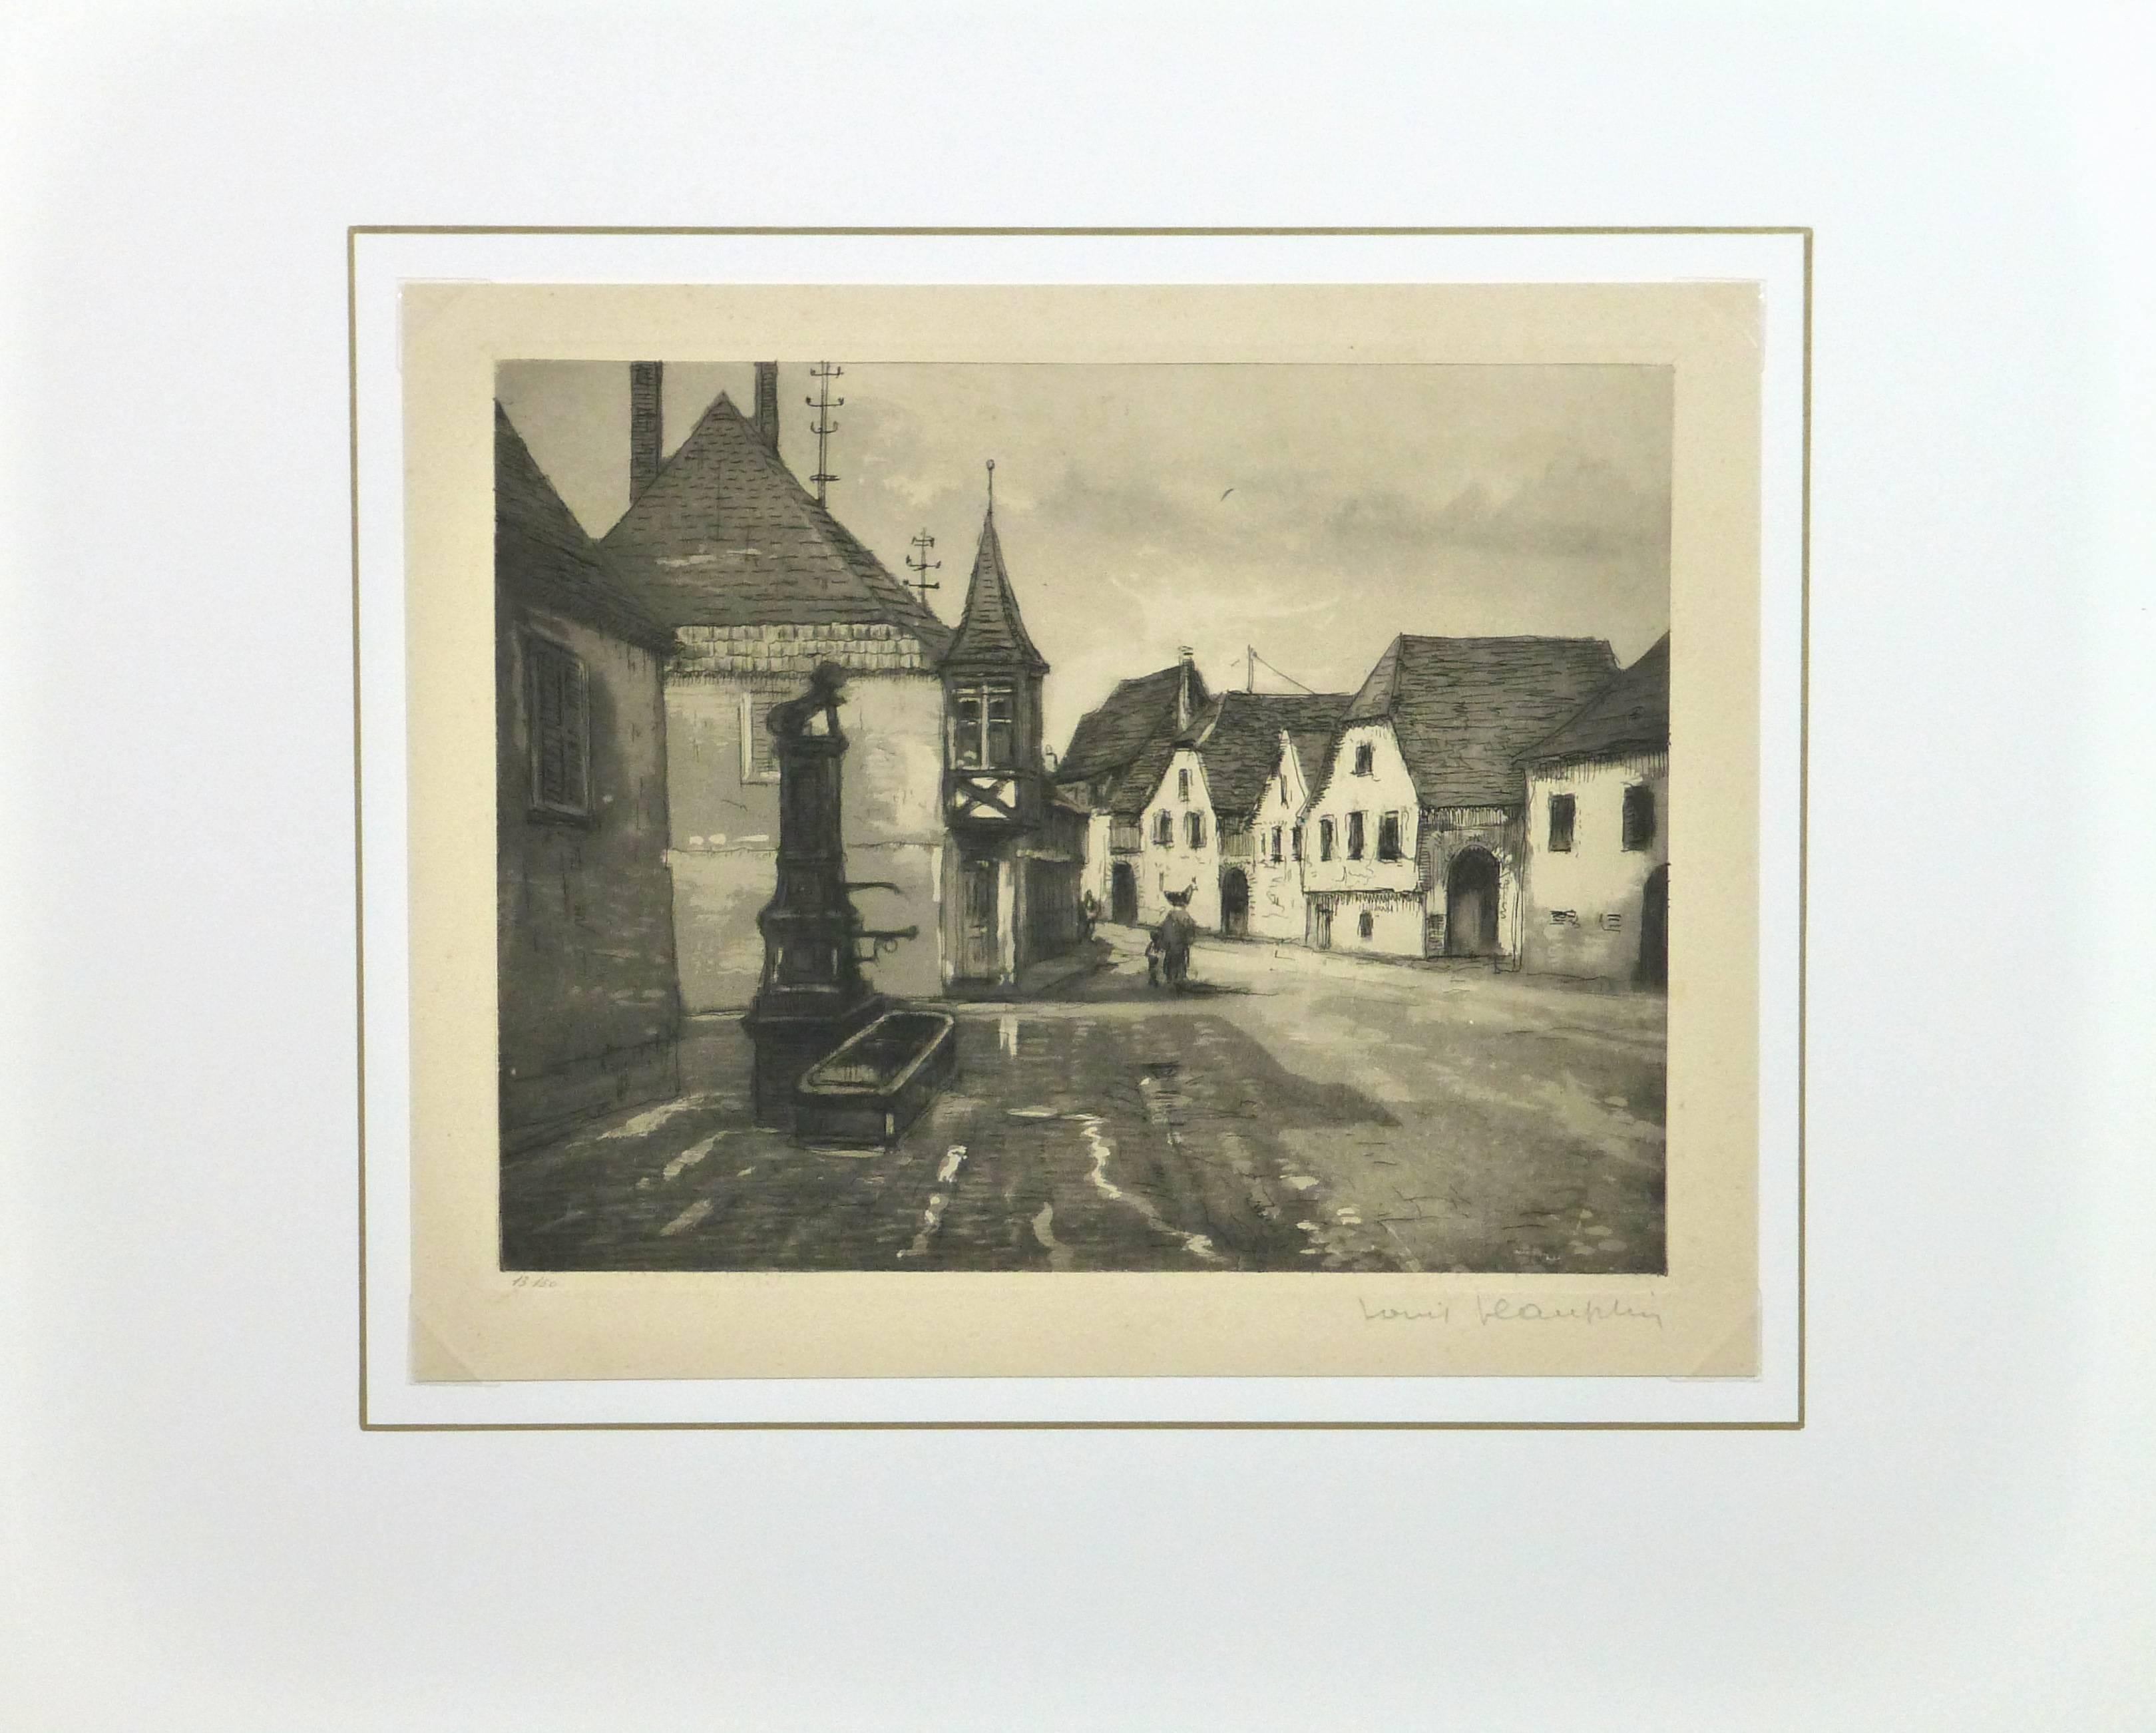 Enchanting black and white etching of a scene from the charming streets of Alsace, France, circa 1920. Signed lower right and numbered 13 of 150 lower left. 

Original one-of-a-kind artwork on paper displayed on a white mat with a gold border. Mat